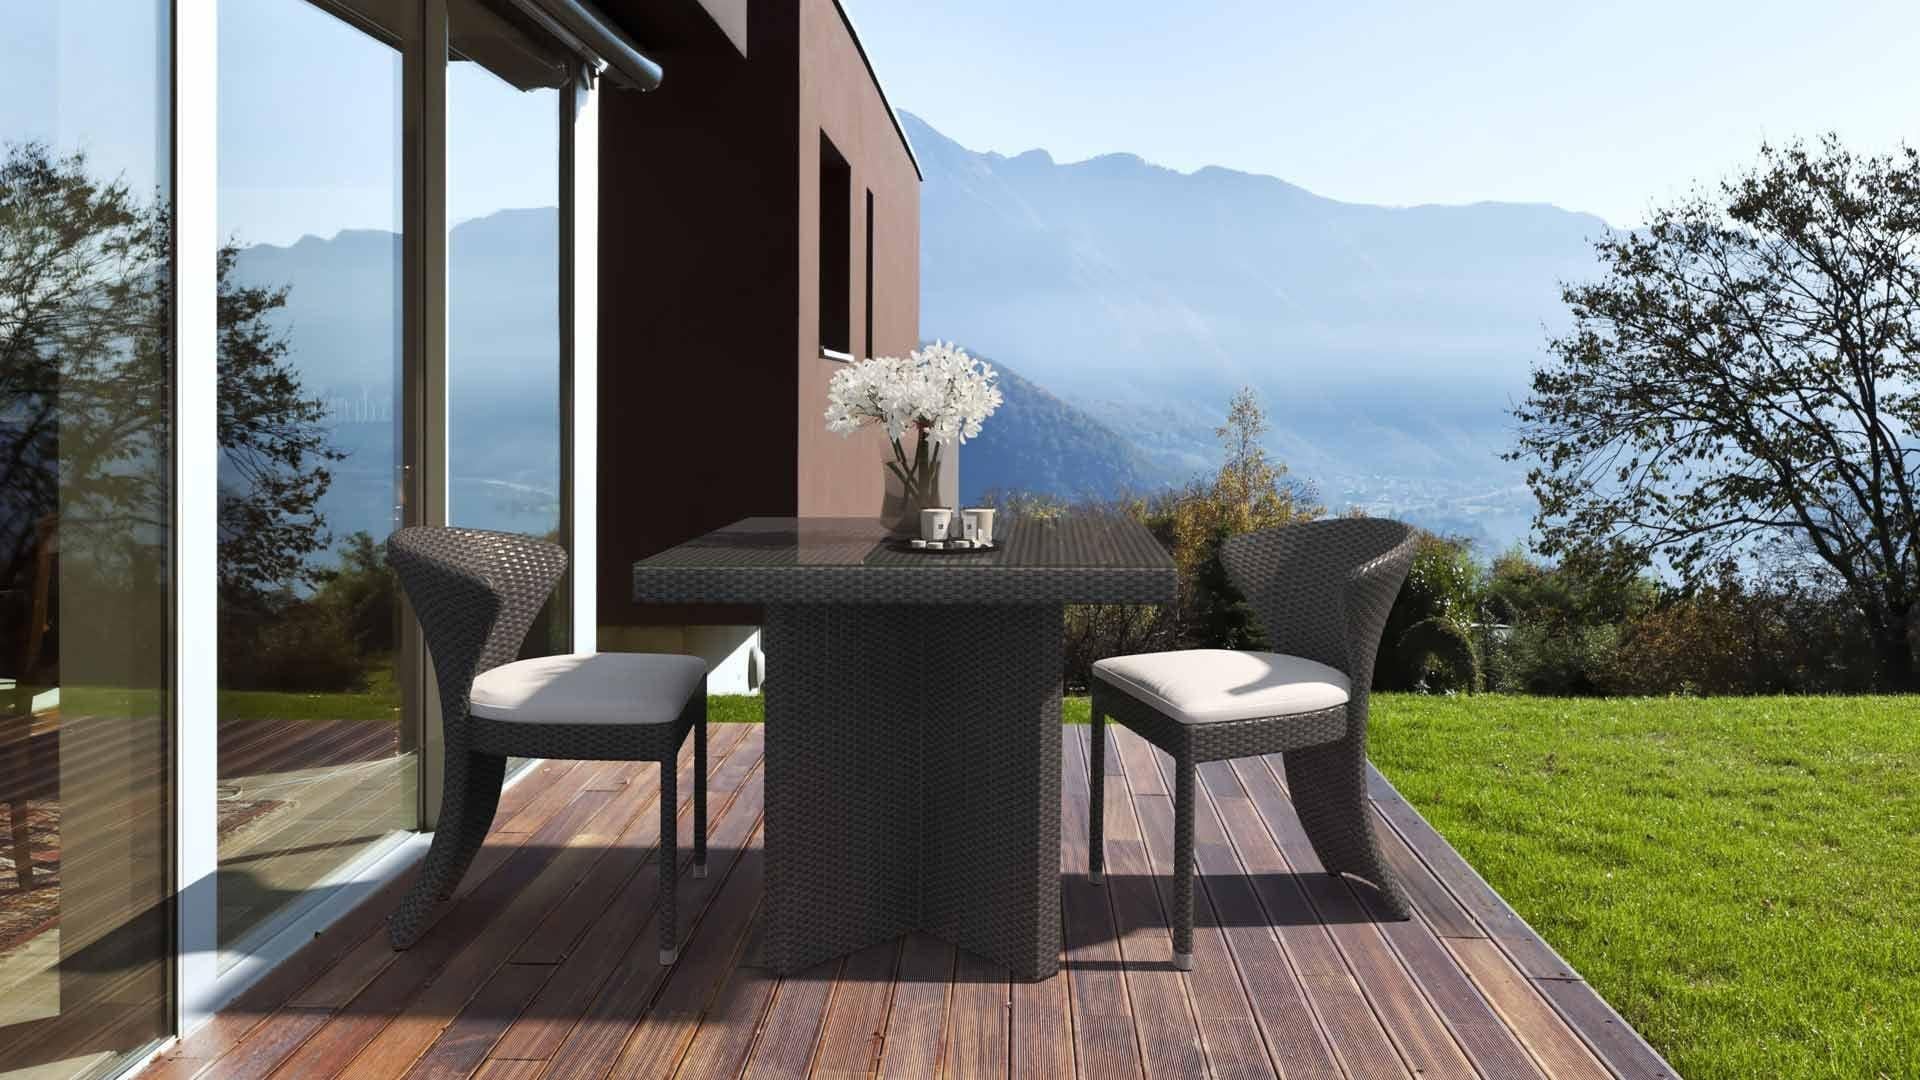 This elegant dining chair collection, offering options with or without armrests, forms part of an extensive range that includes dining chairs, bar chairs, lounge chairs, and sofas, designed to enhance any outdoor setting. These pieces are